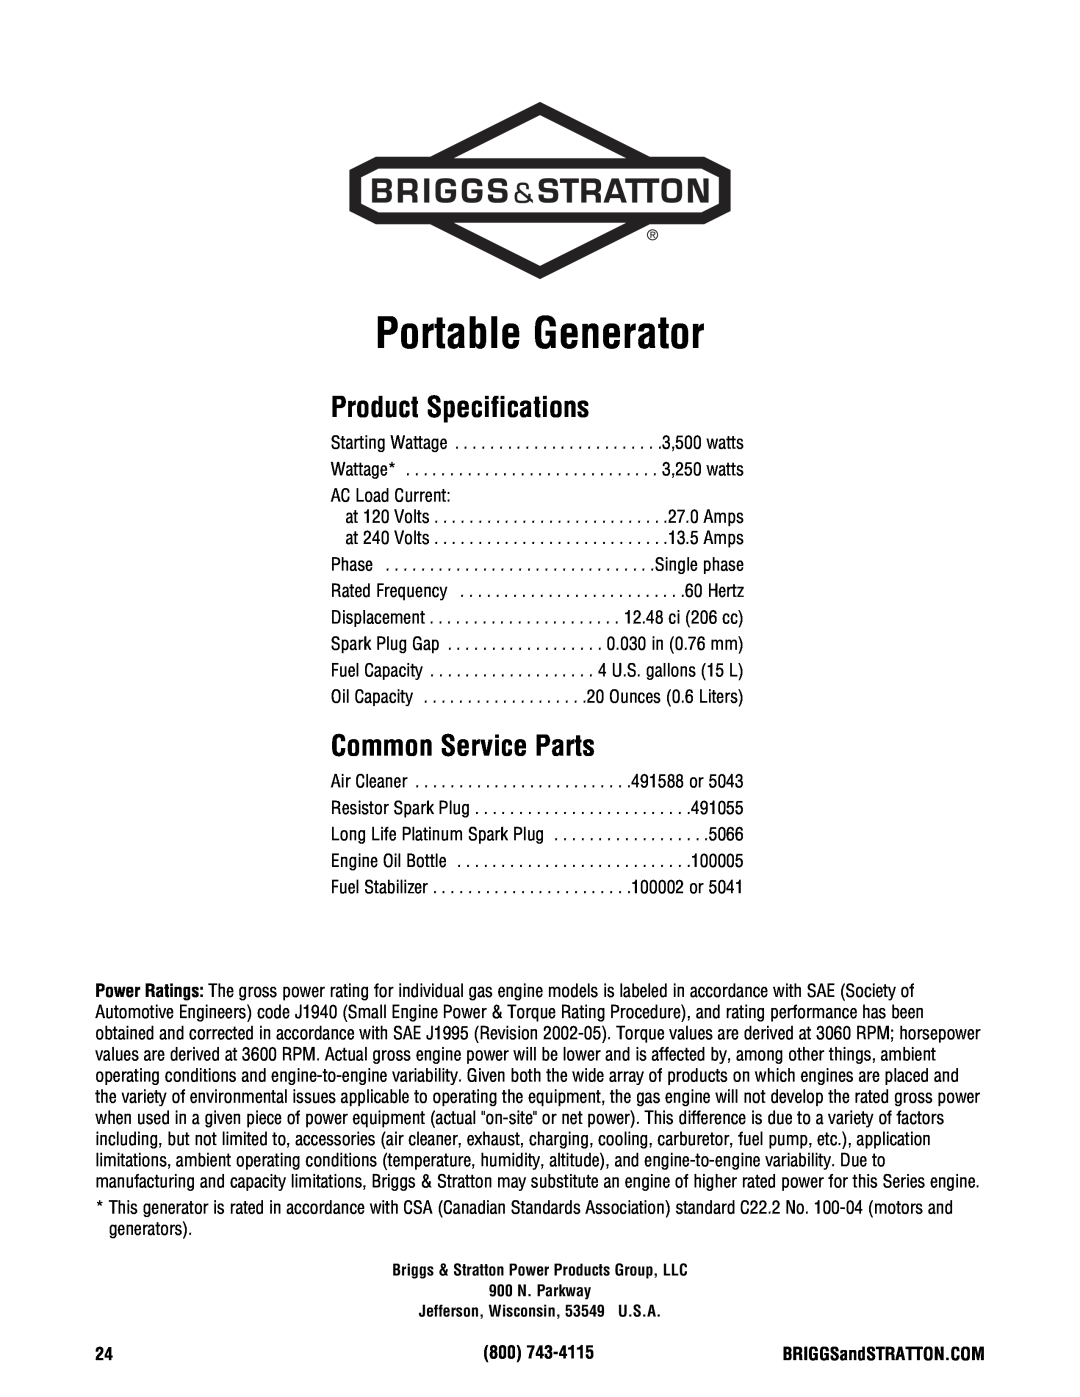 Briggs & Stratton 209443gs manual Product Specifications, Common Service Parts, Portable Generator 